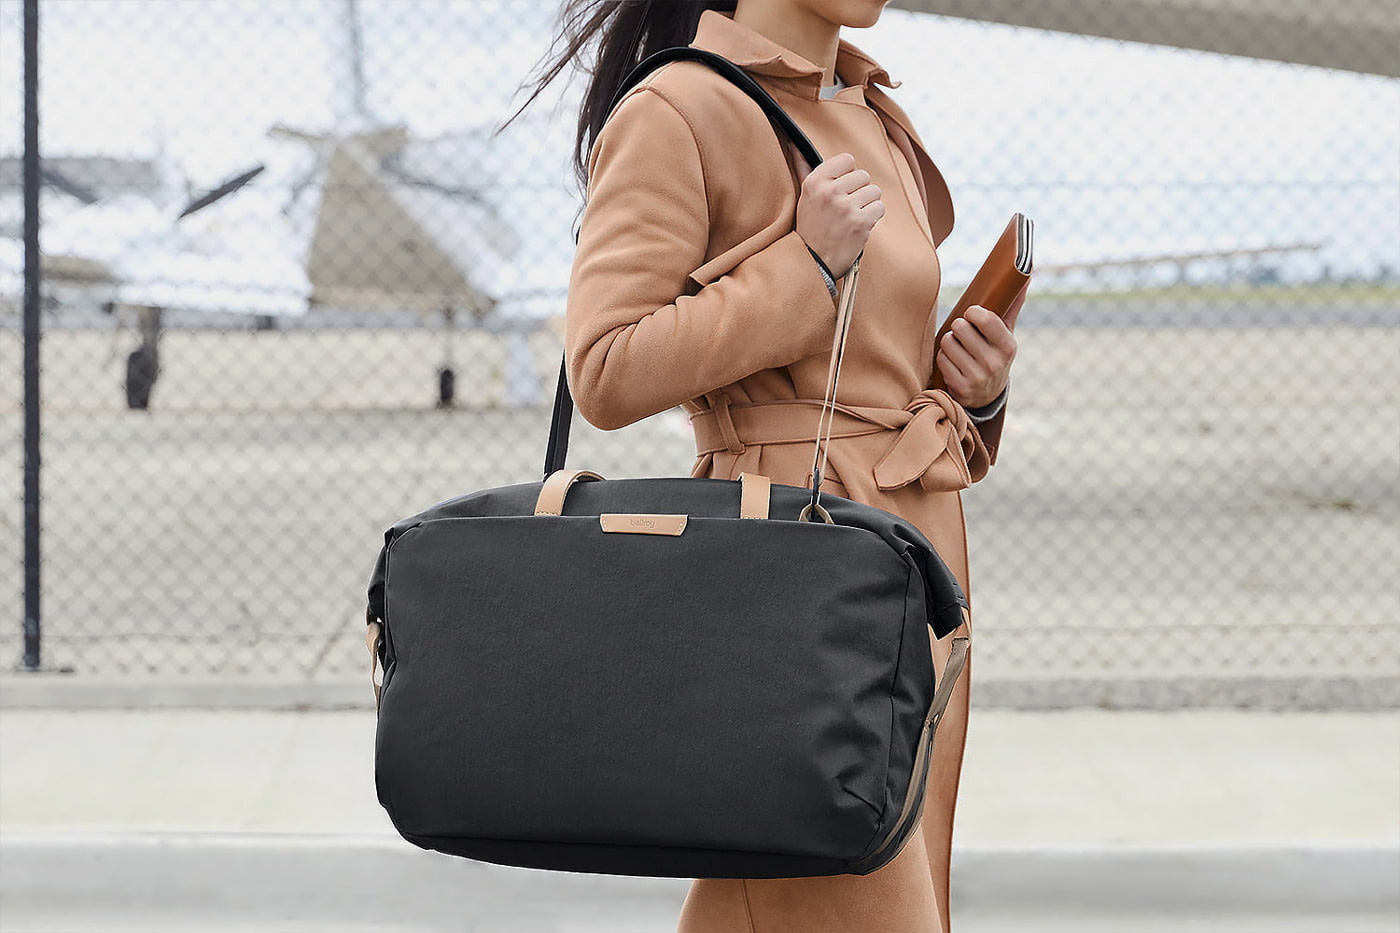 Functional bag by Bellroy